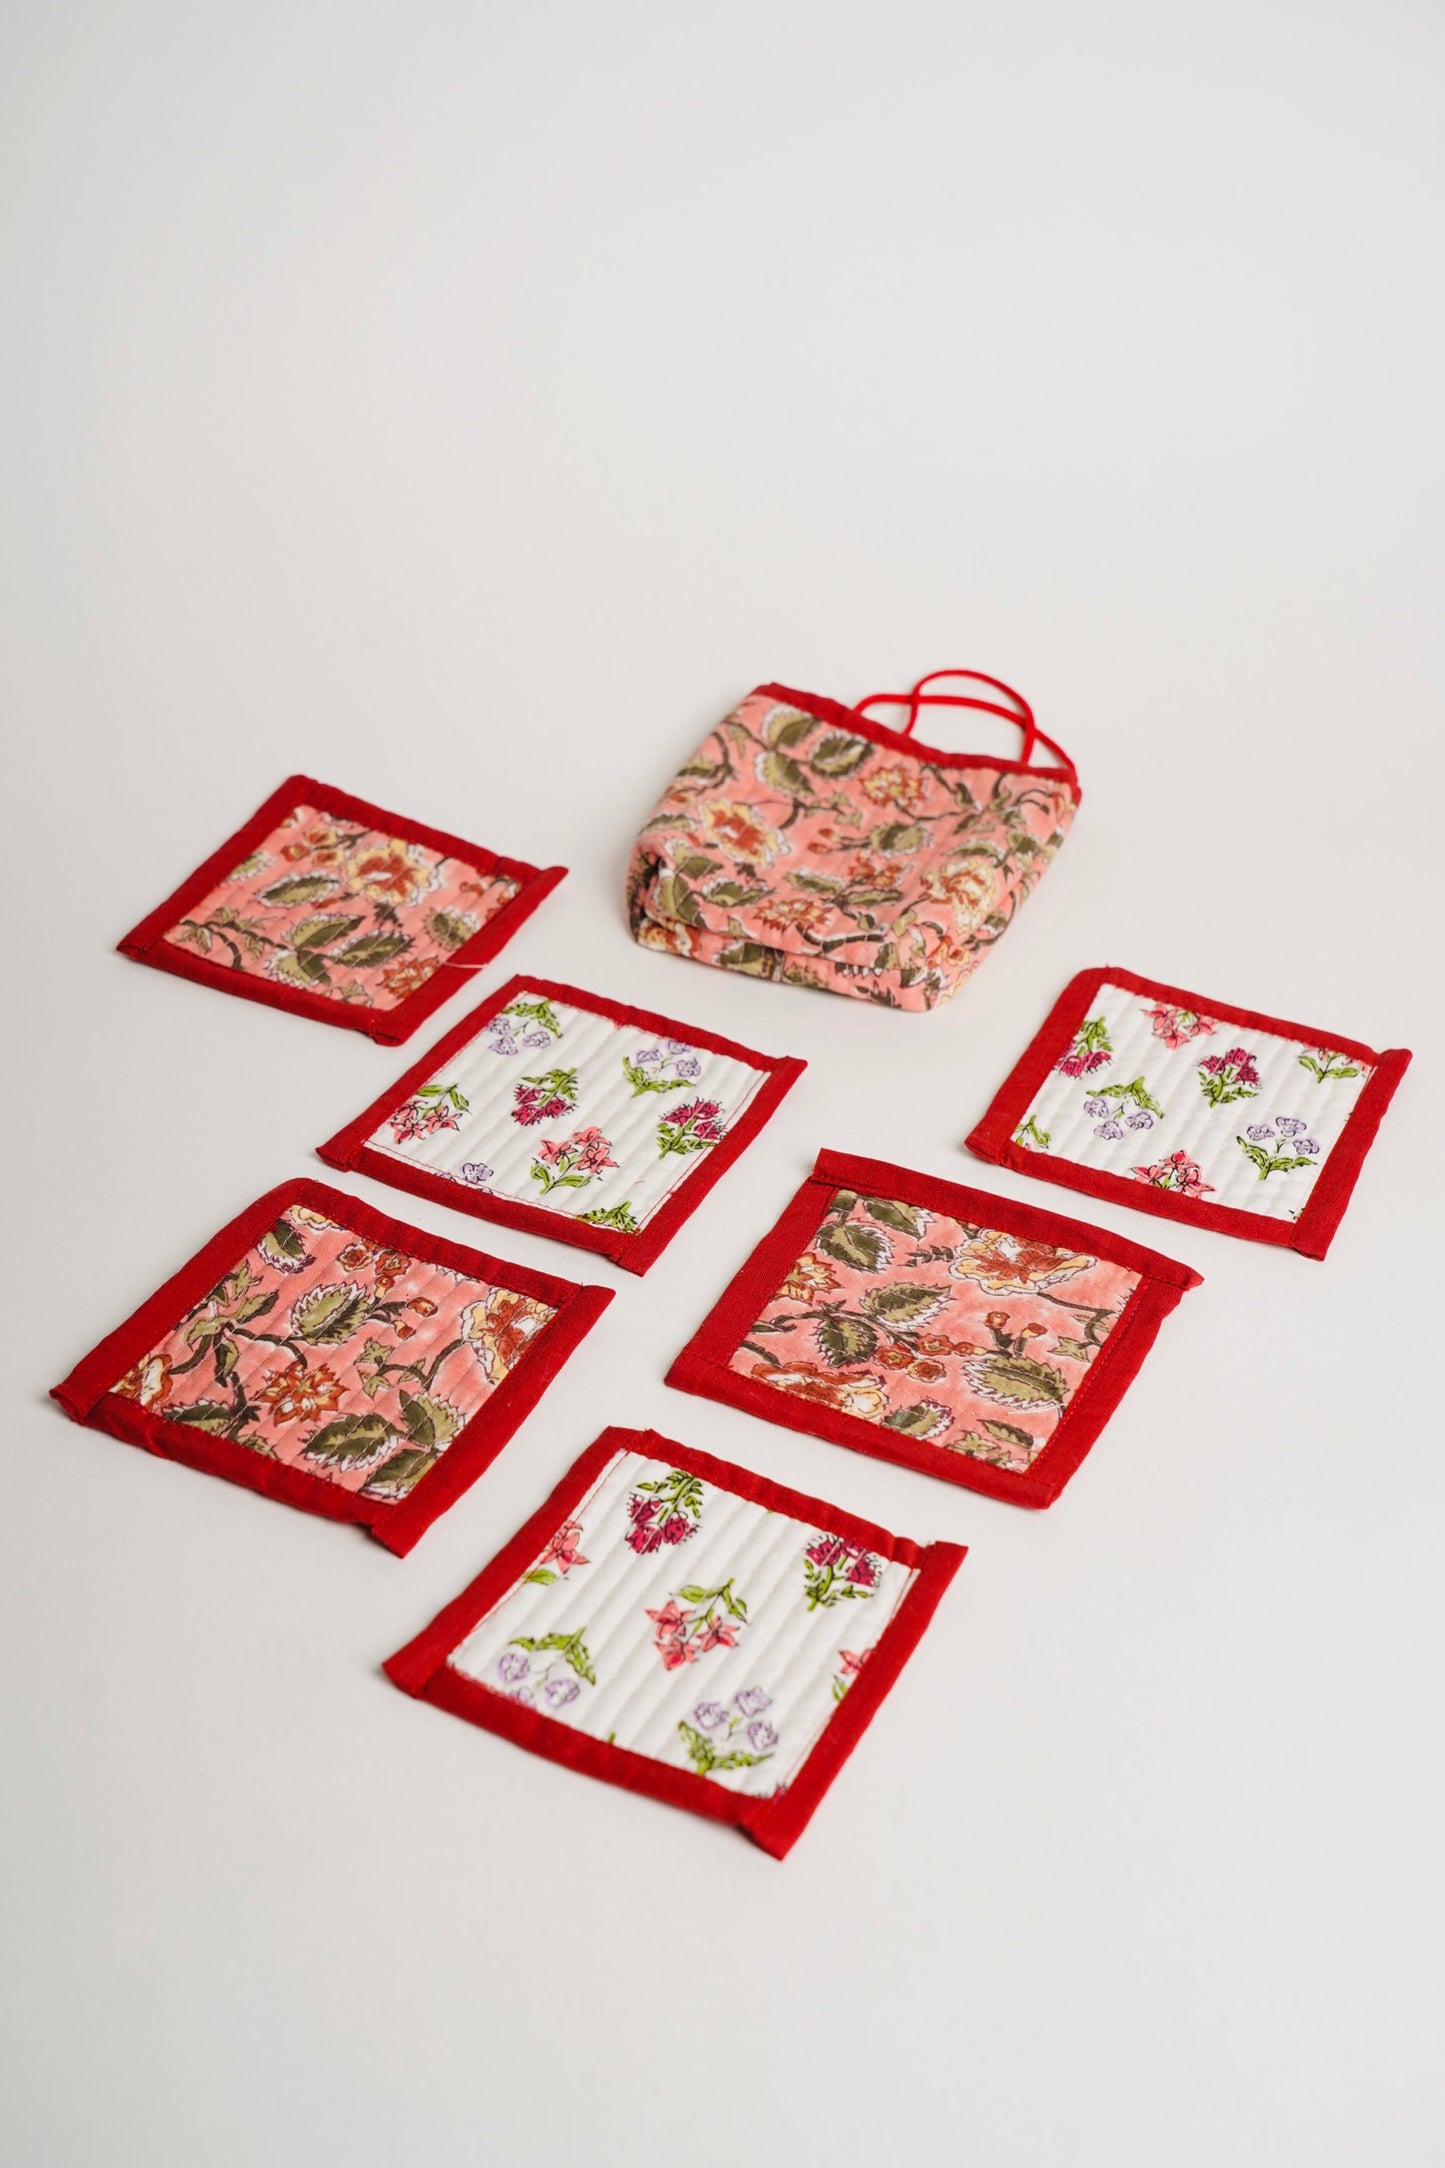 Zero Waste Fabric Coasters - Set of 6 with Pouch